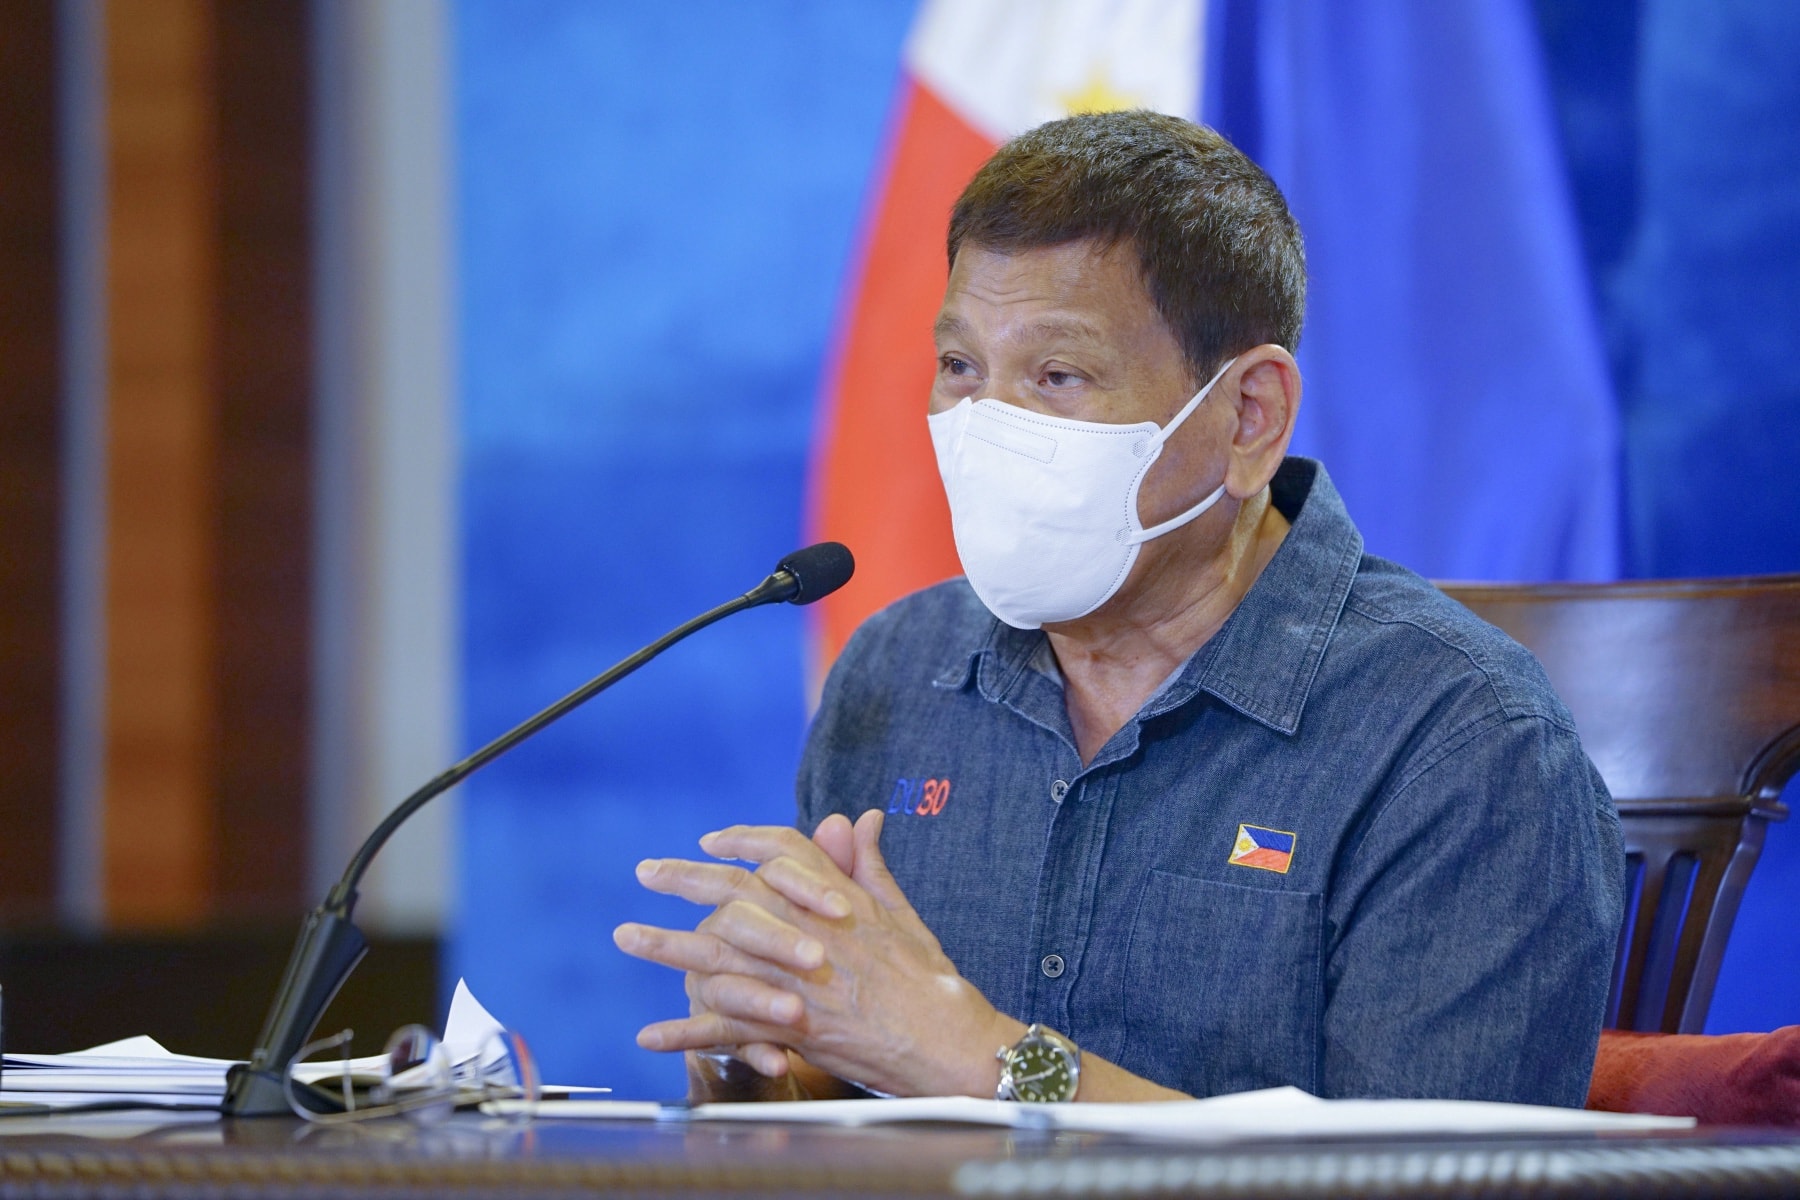 President Rodrigo Roa Duterte talks to the people after holding a meeting with the Inter-Agency Task Force on the Emerging Infectious Diseases (IATF-EID) core members at the Arcadia Active Lifestyle Center in Matina, Davao City on June 21, 2021. Image from PCOO